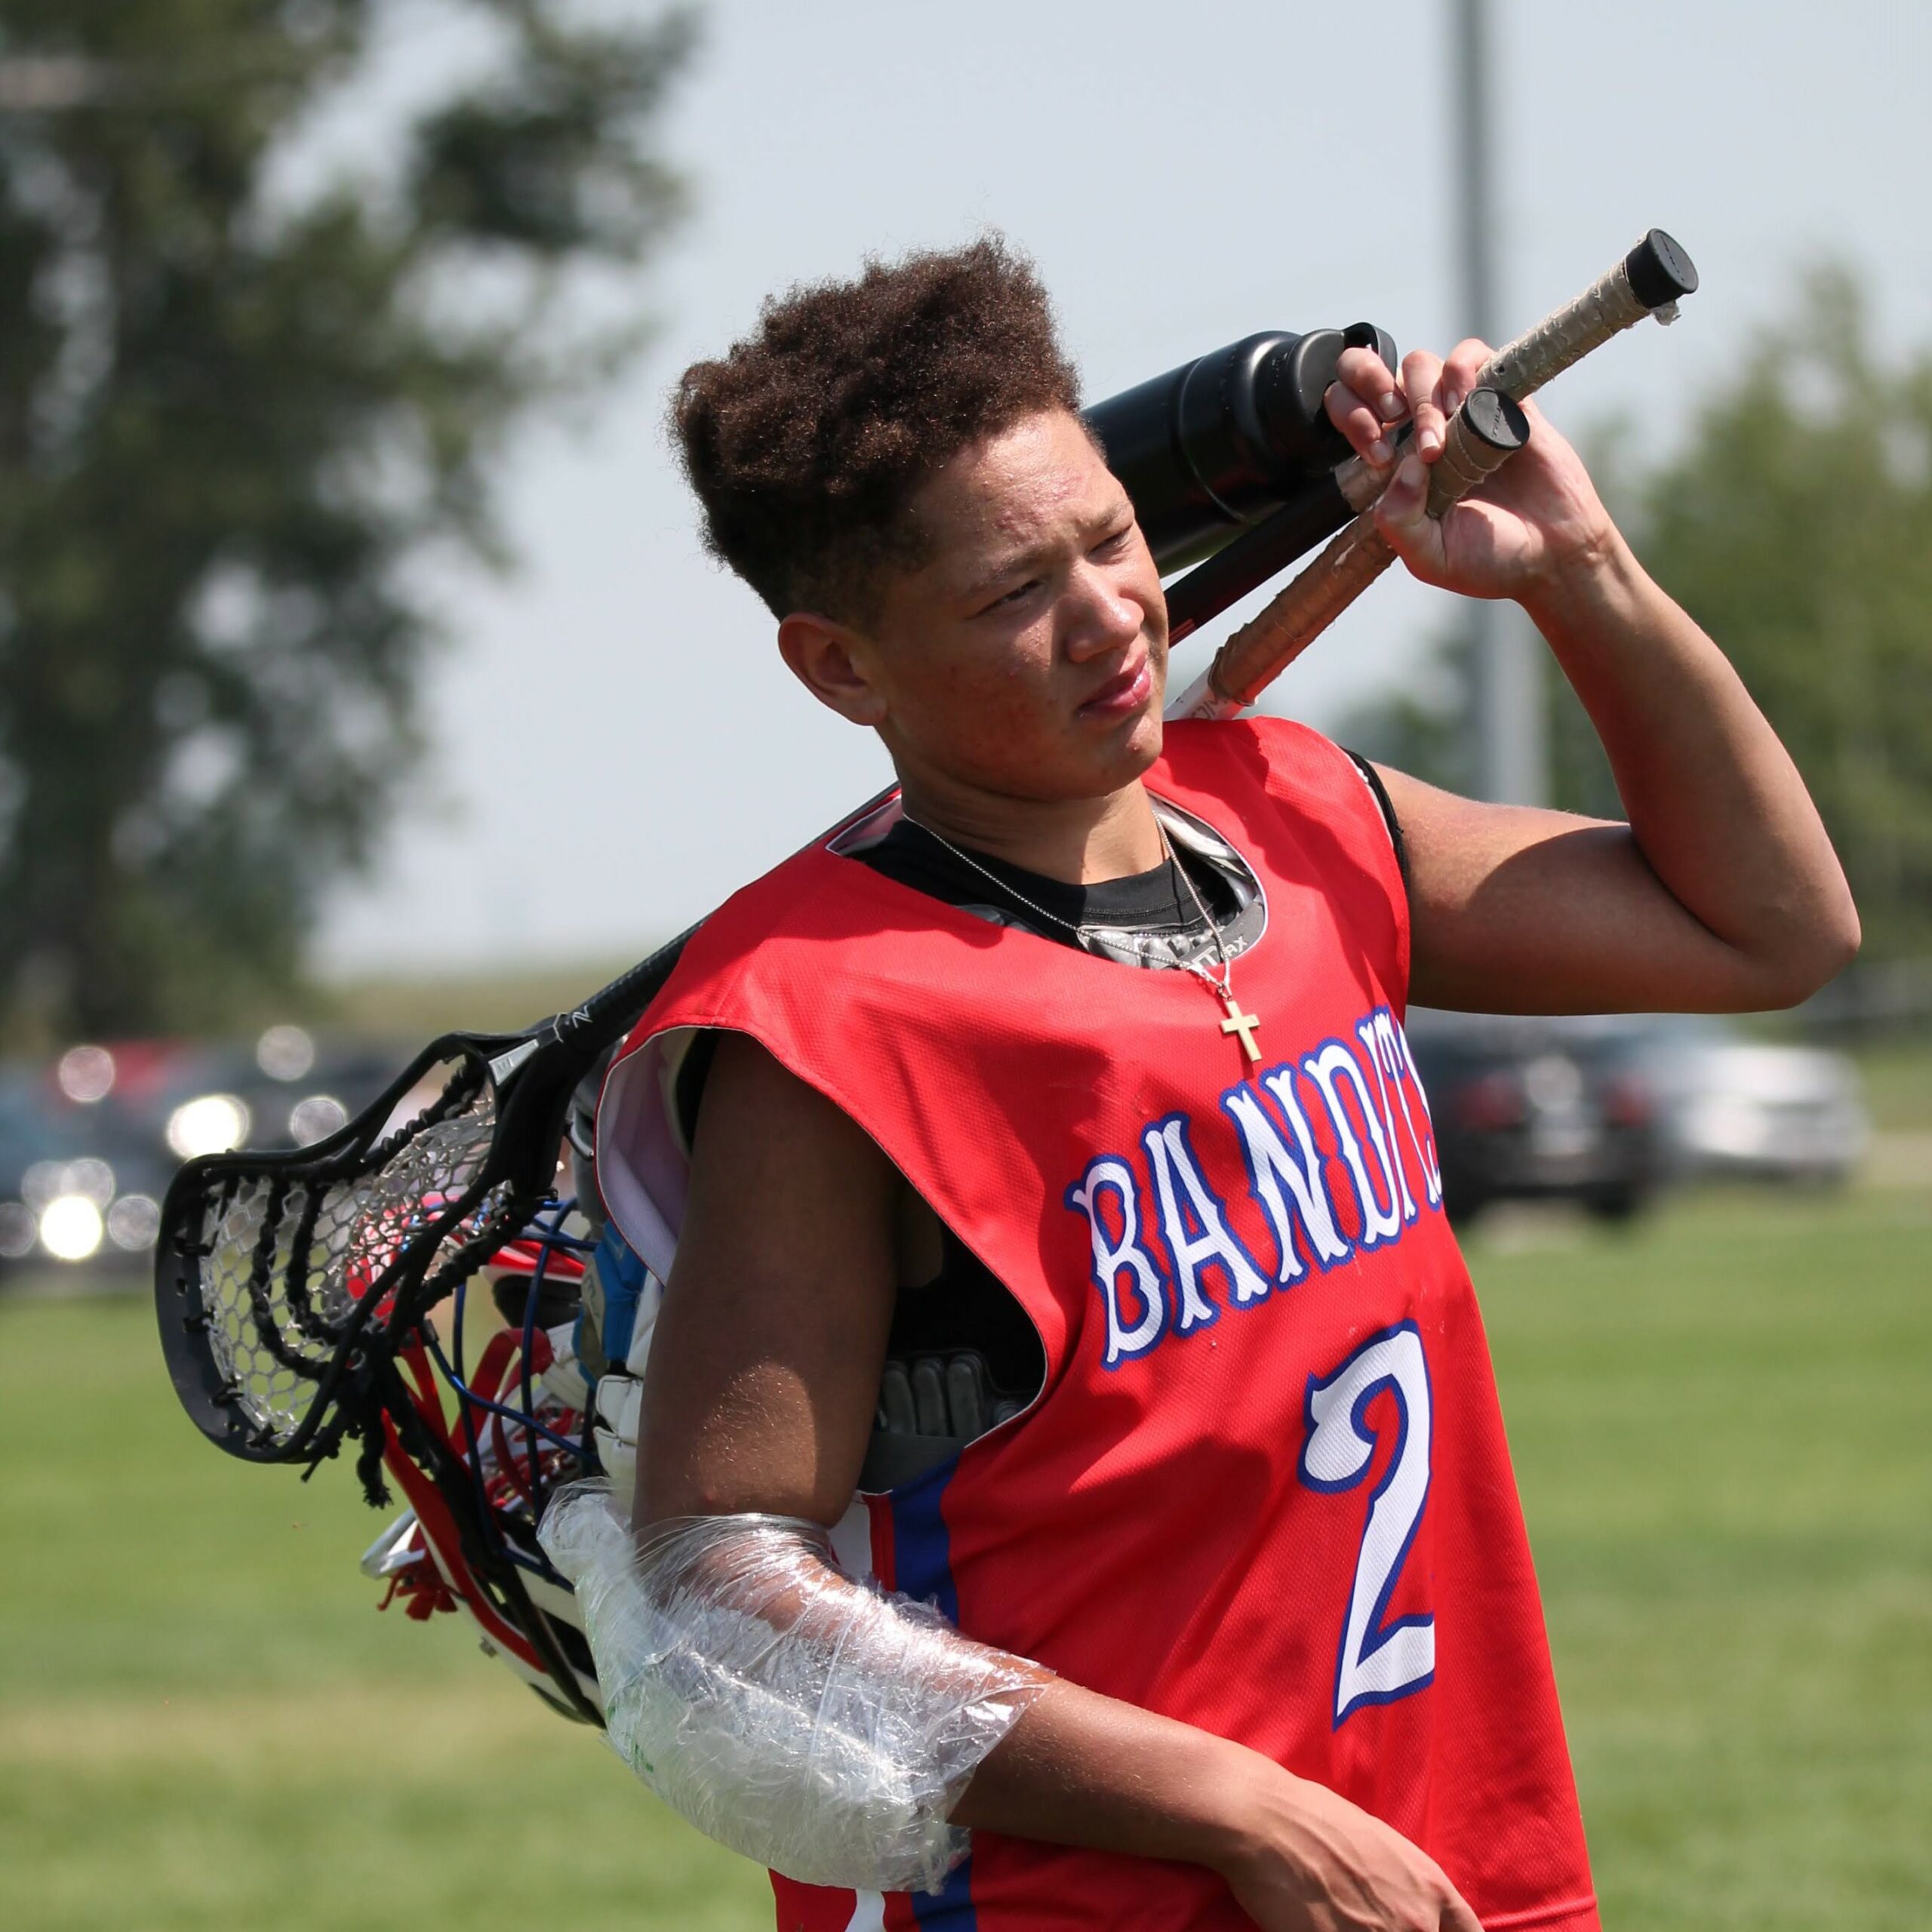 Tristan Johnson in his Bandits lacrosse uniform carrying his gear